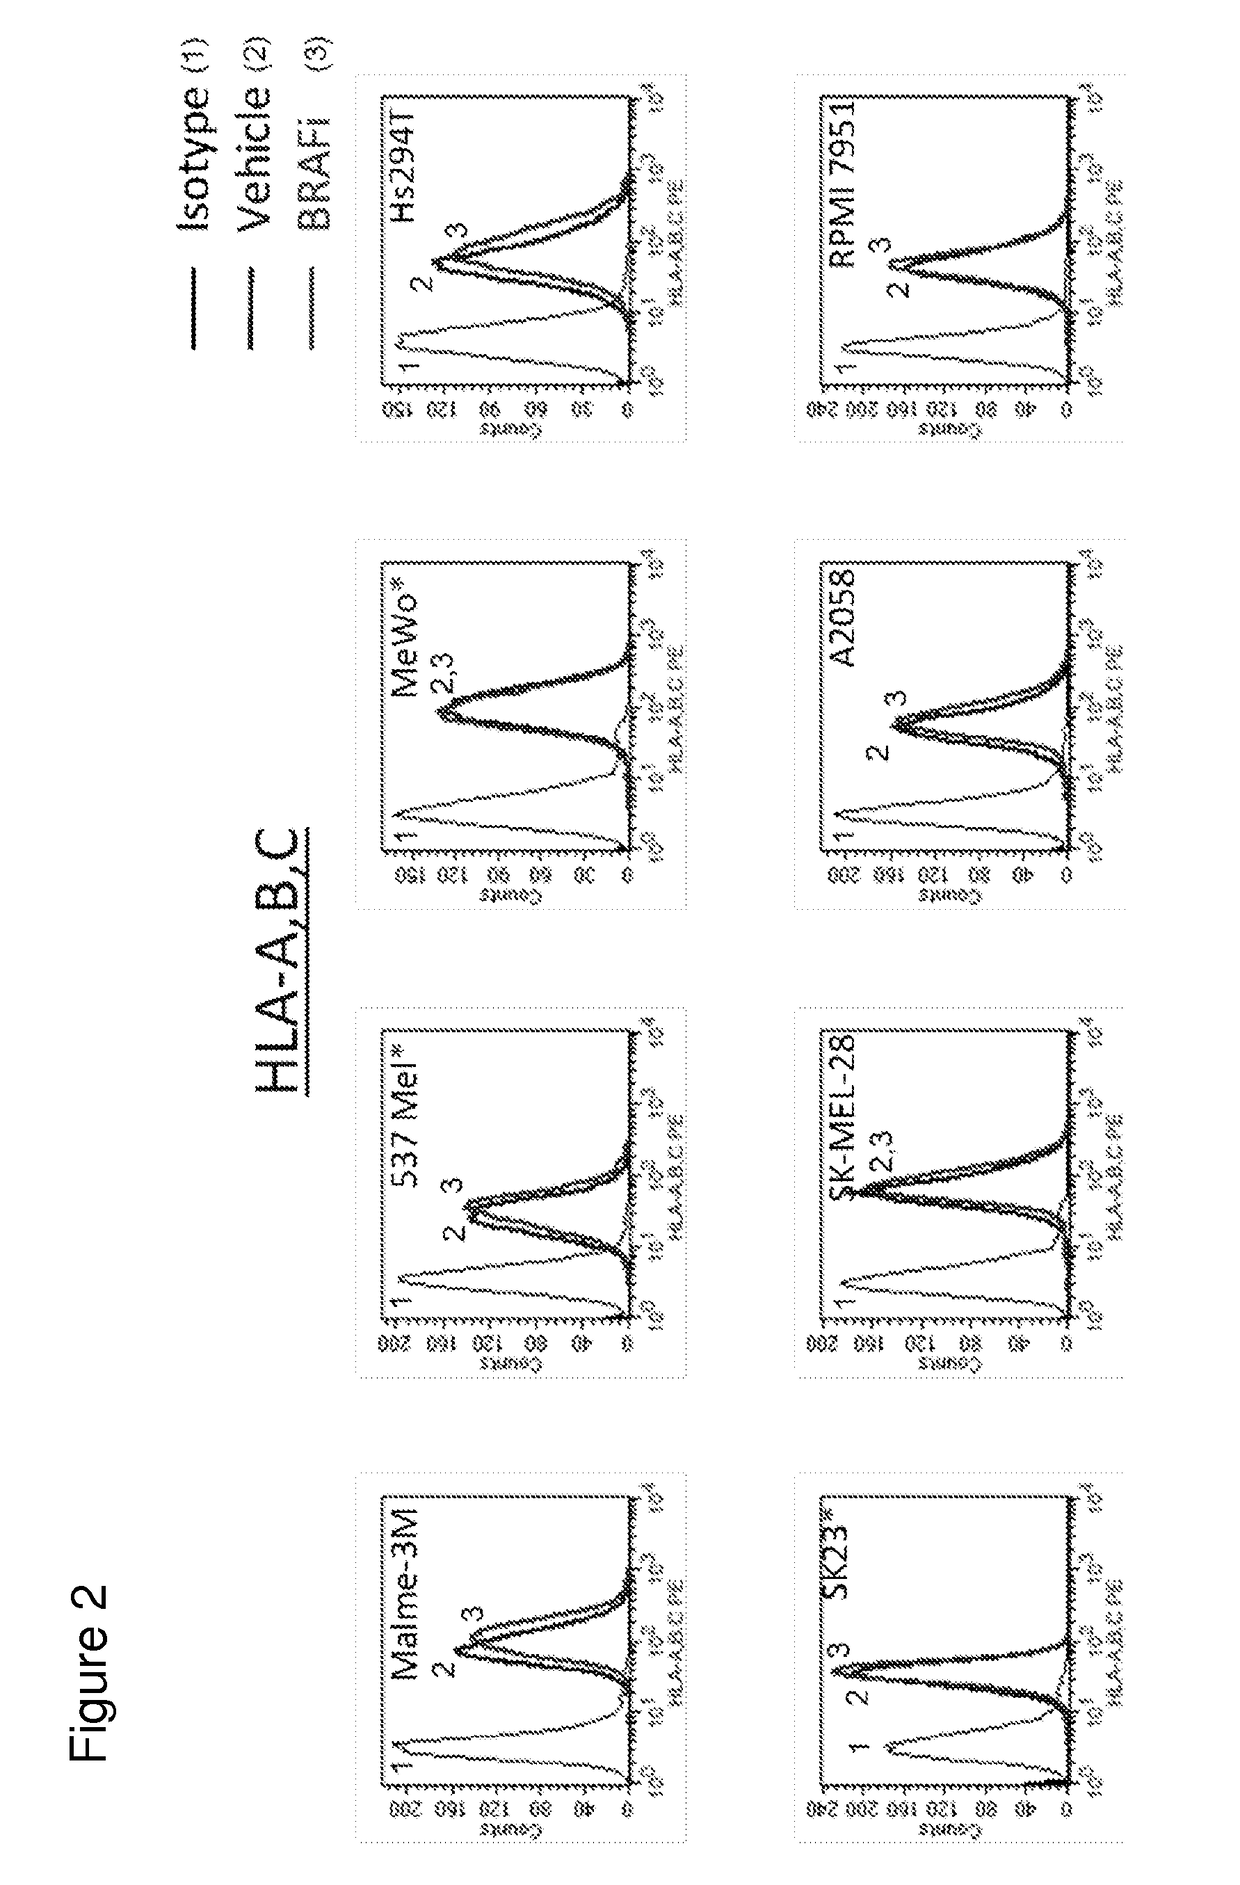 Methods of treating cancer using PD-1 axis binding antagonists and MEK inhibitors